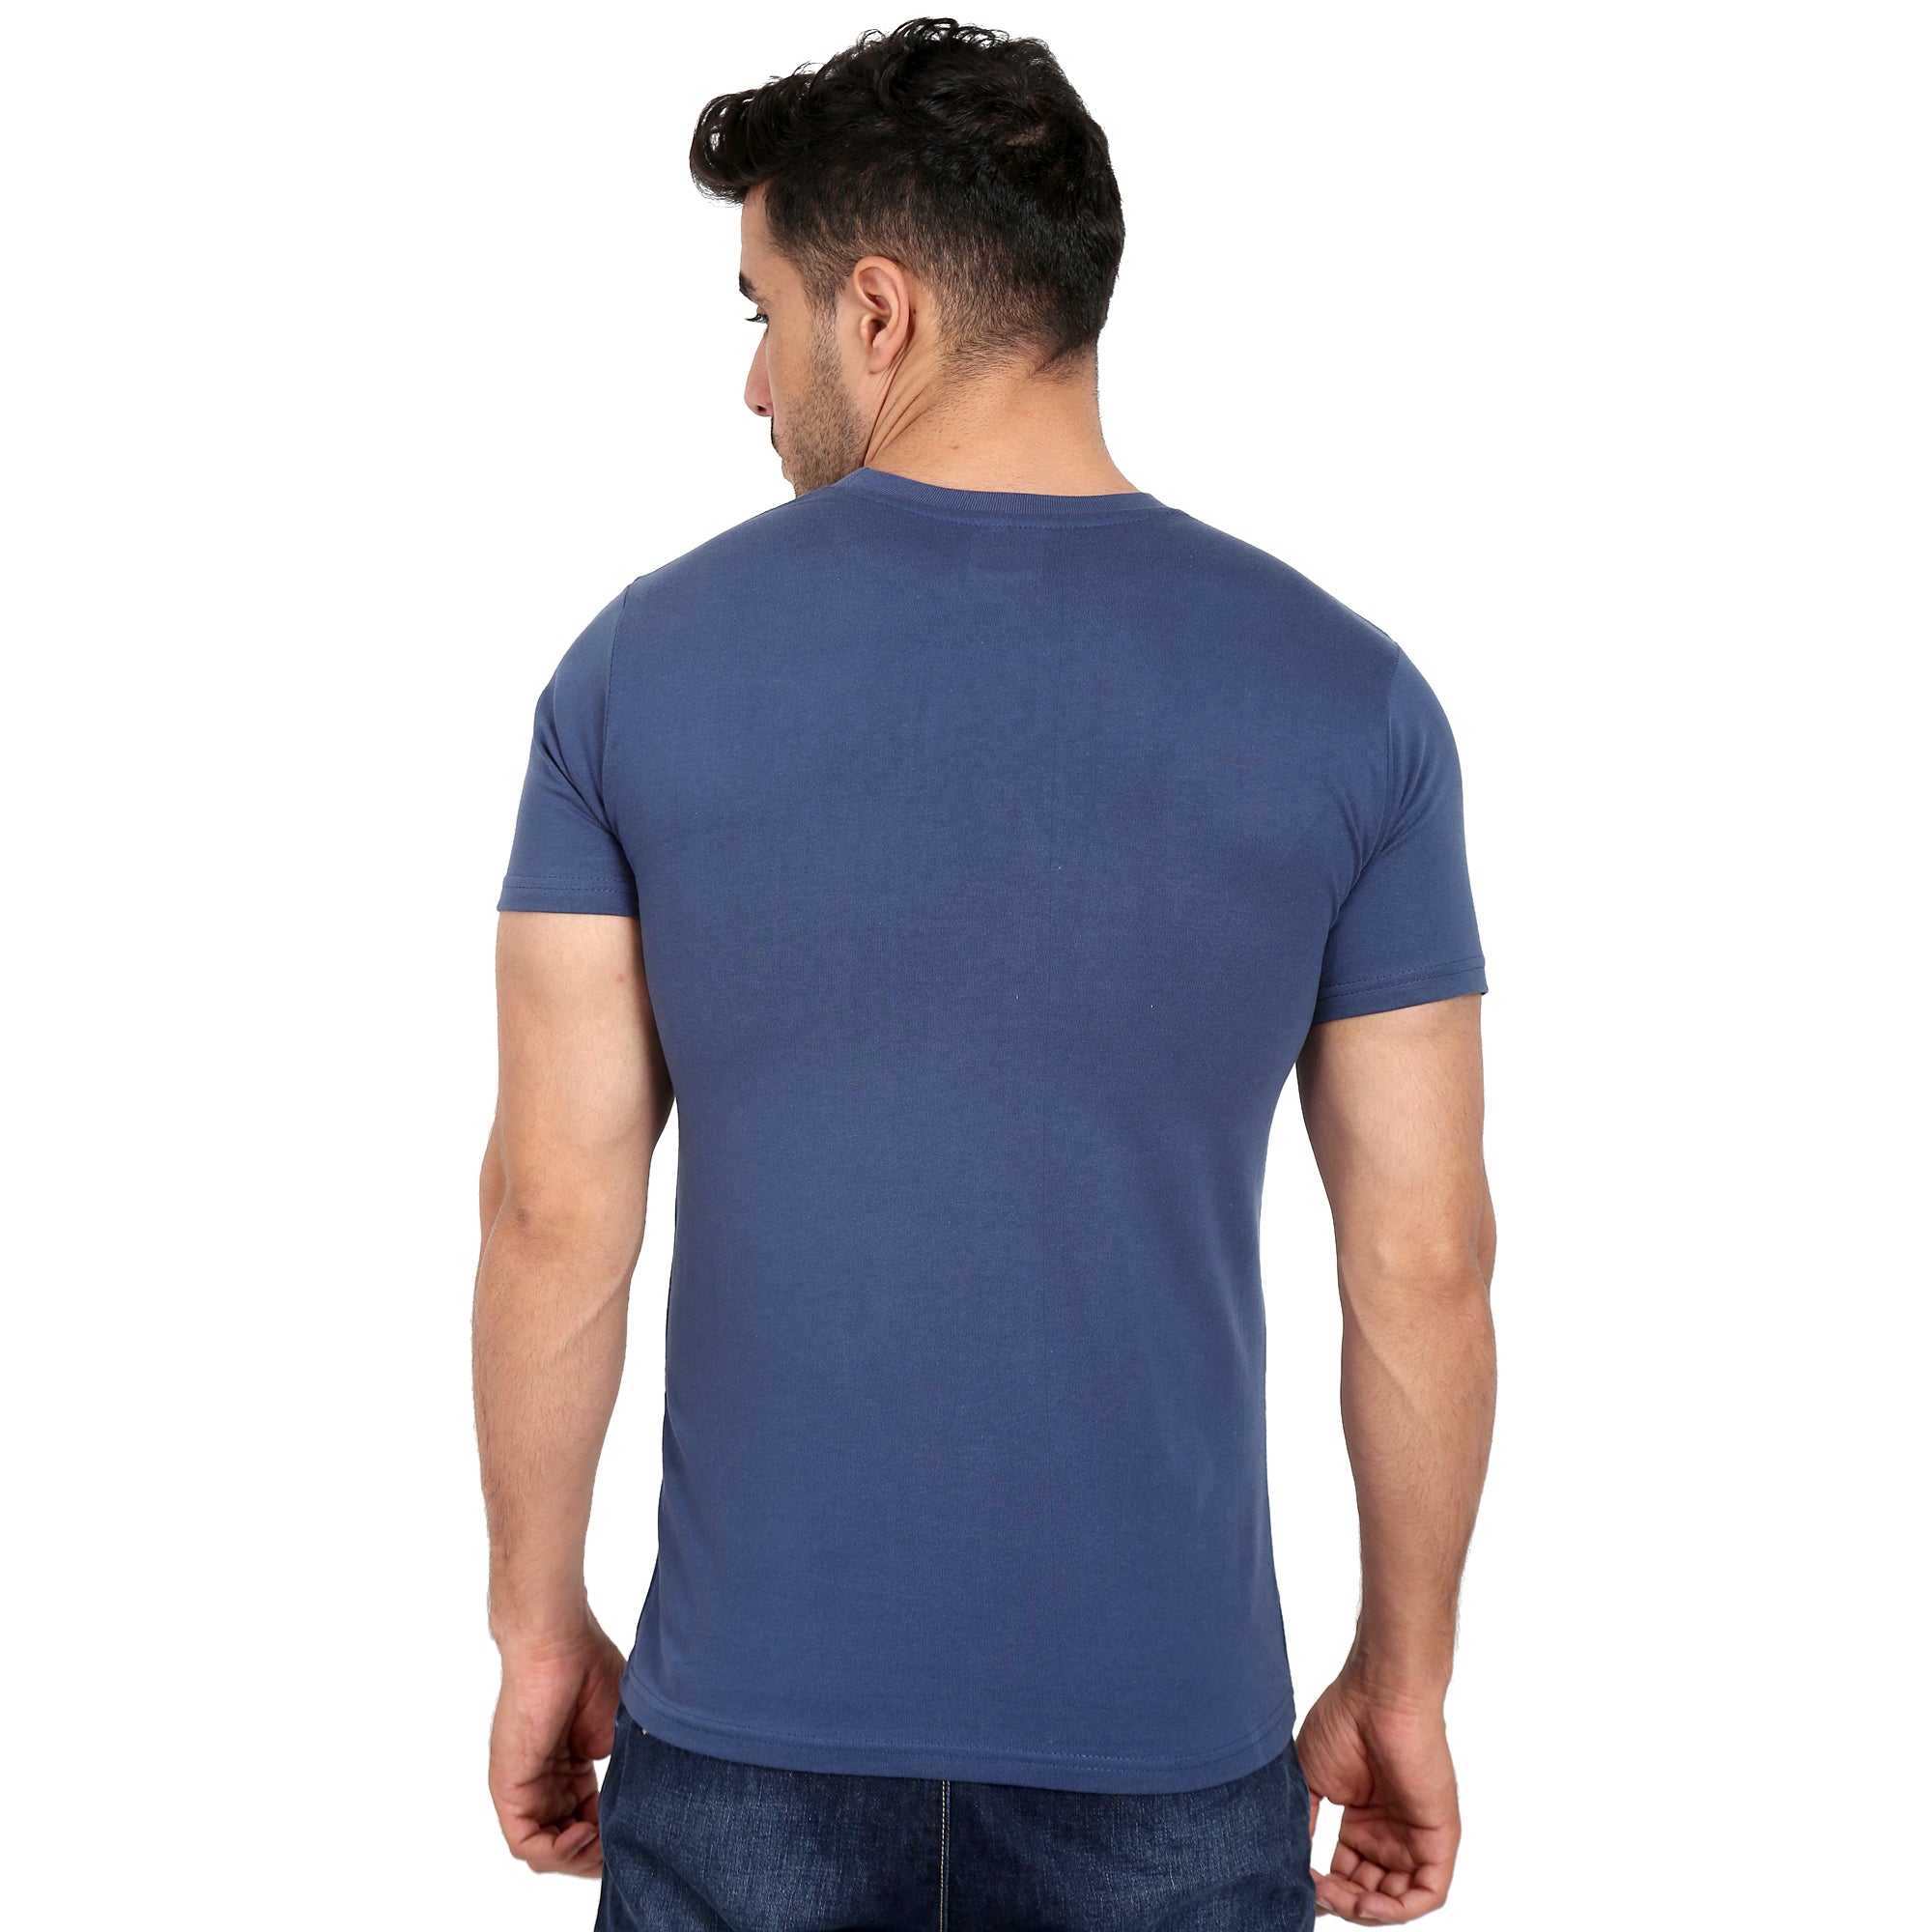 Combo Offer - Men Crew Neck Cotton T-Shirts - Half Sleeves - 3 Colors - Olive Green, Blue & White